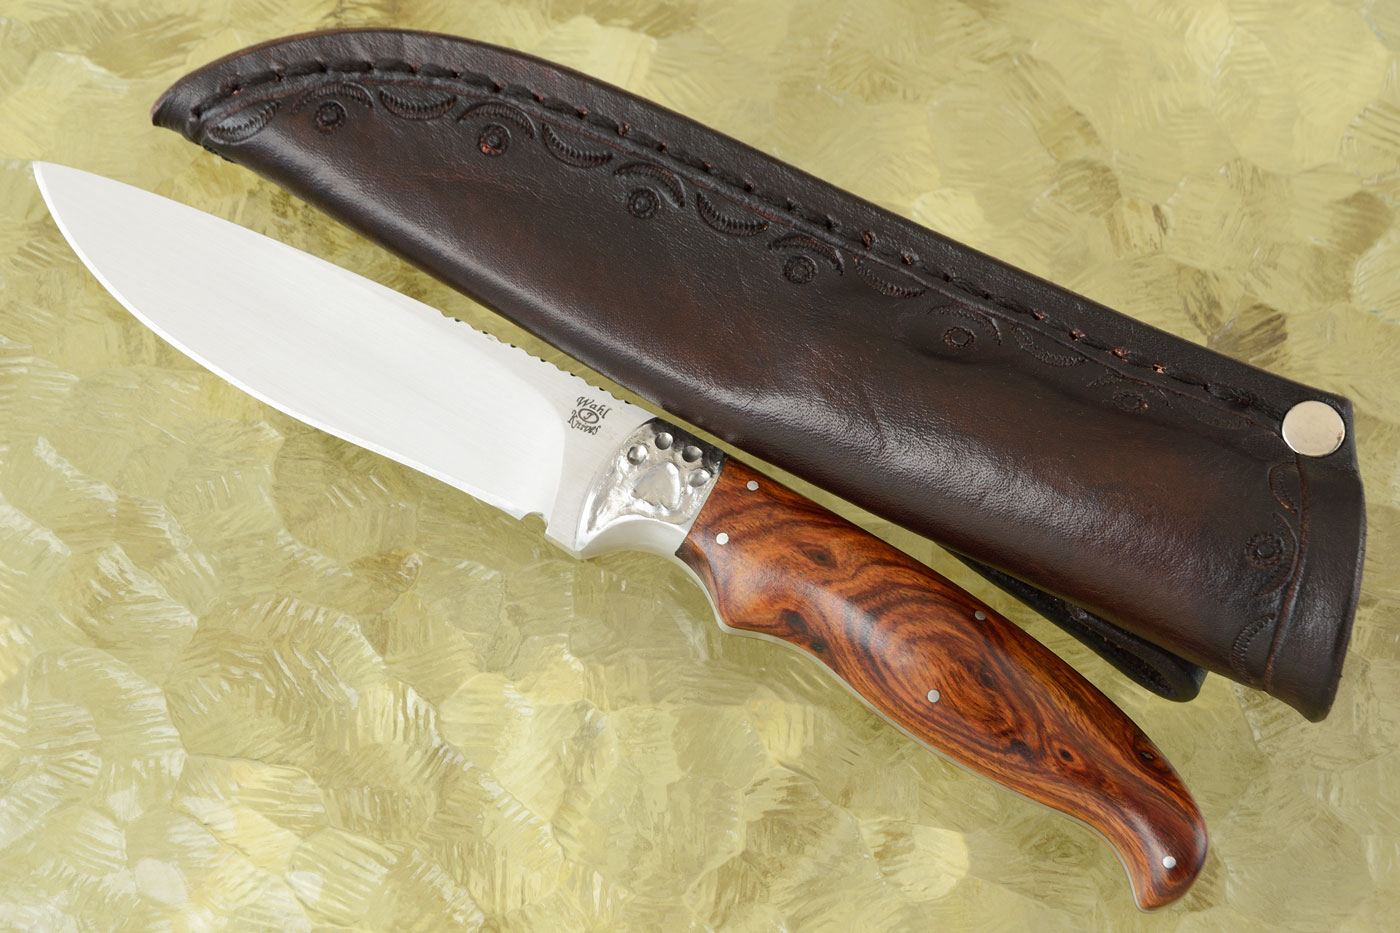 Luiperd (Small Hunter) with Ironwood - M390